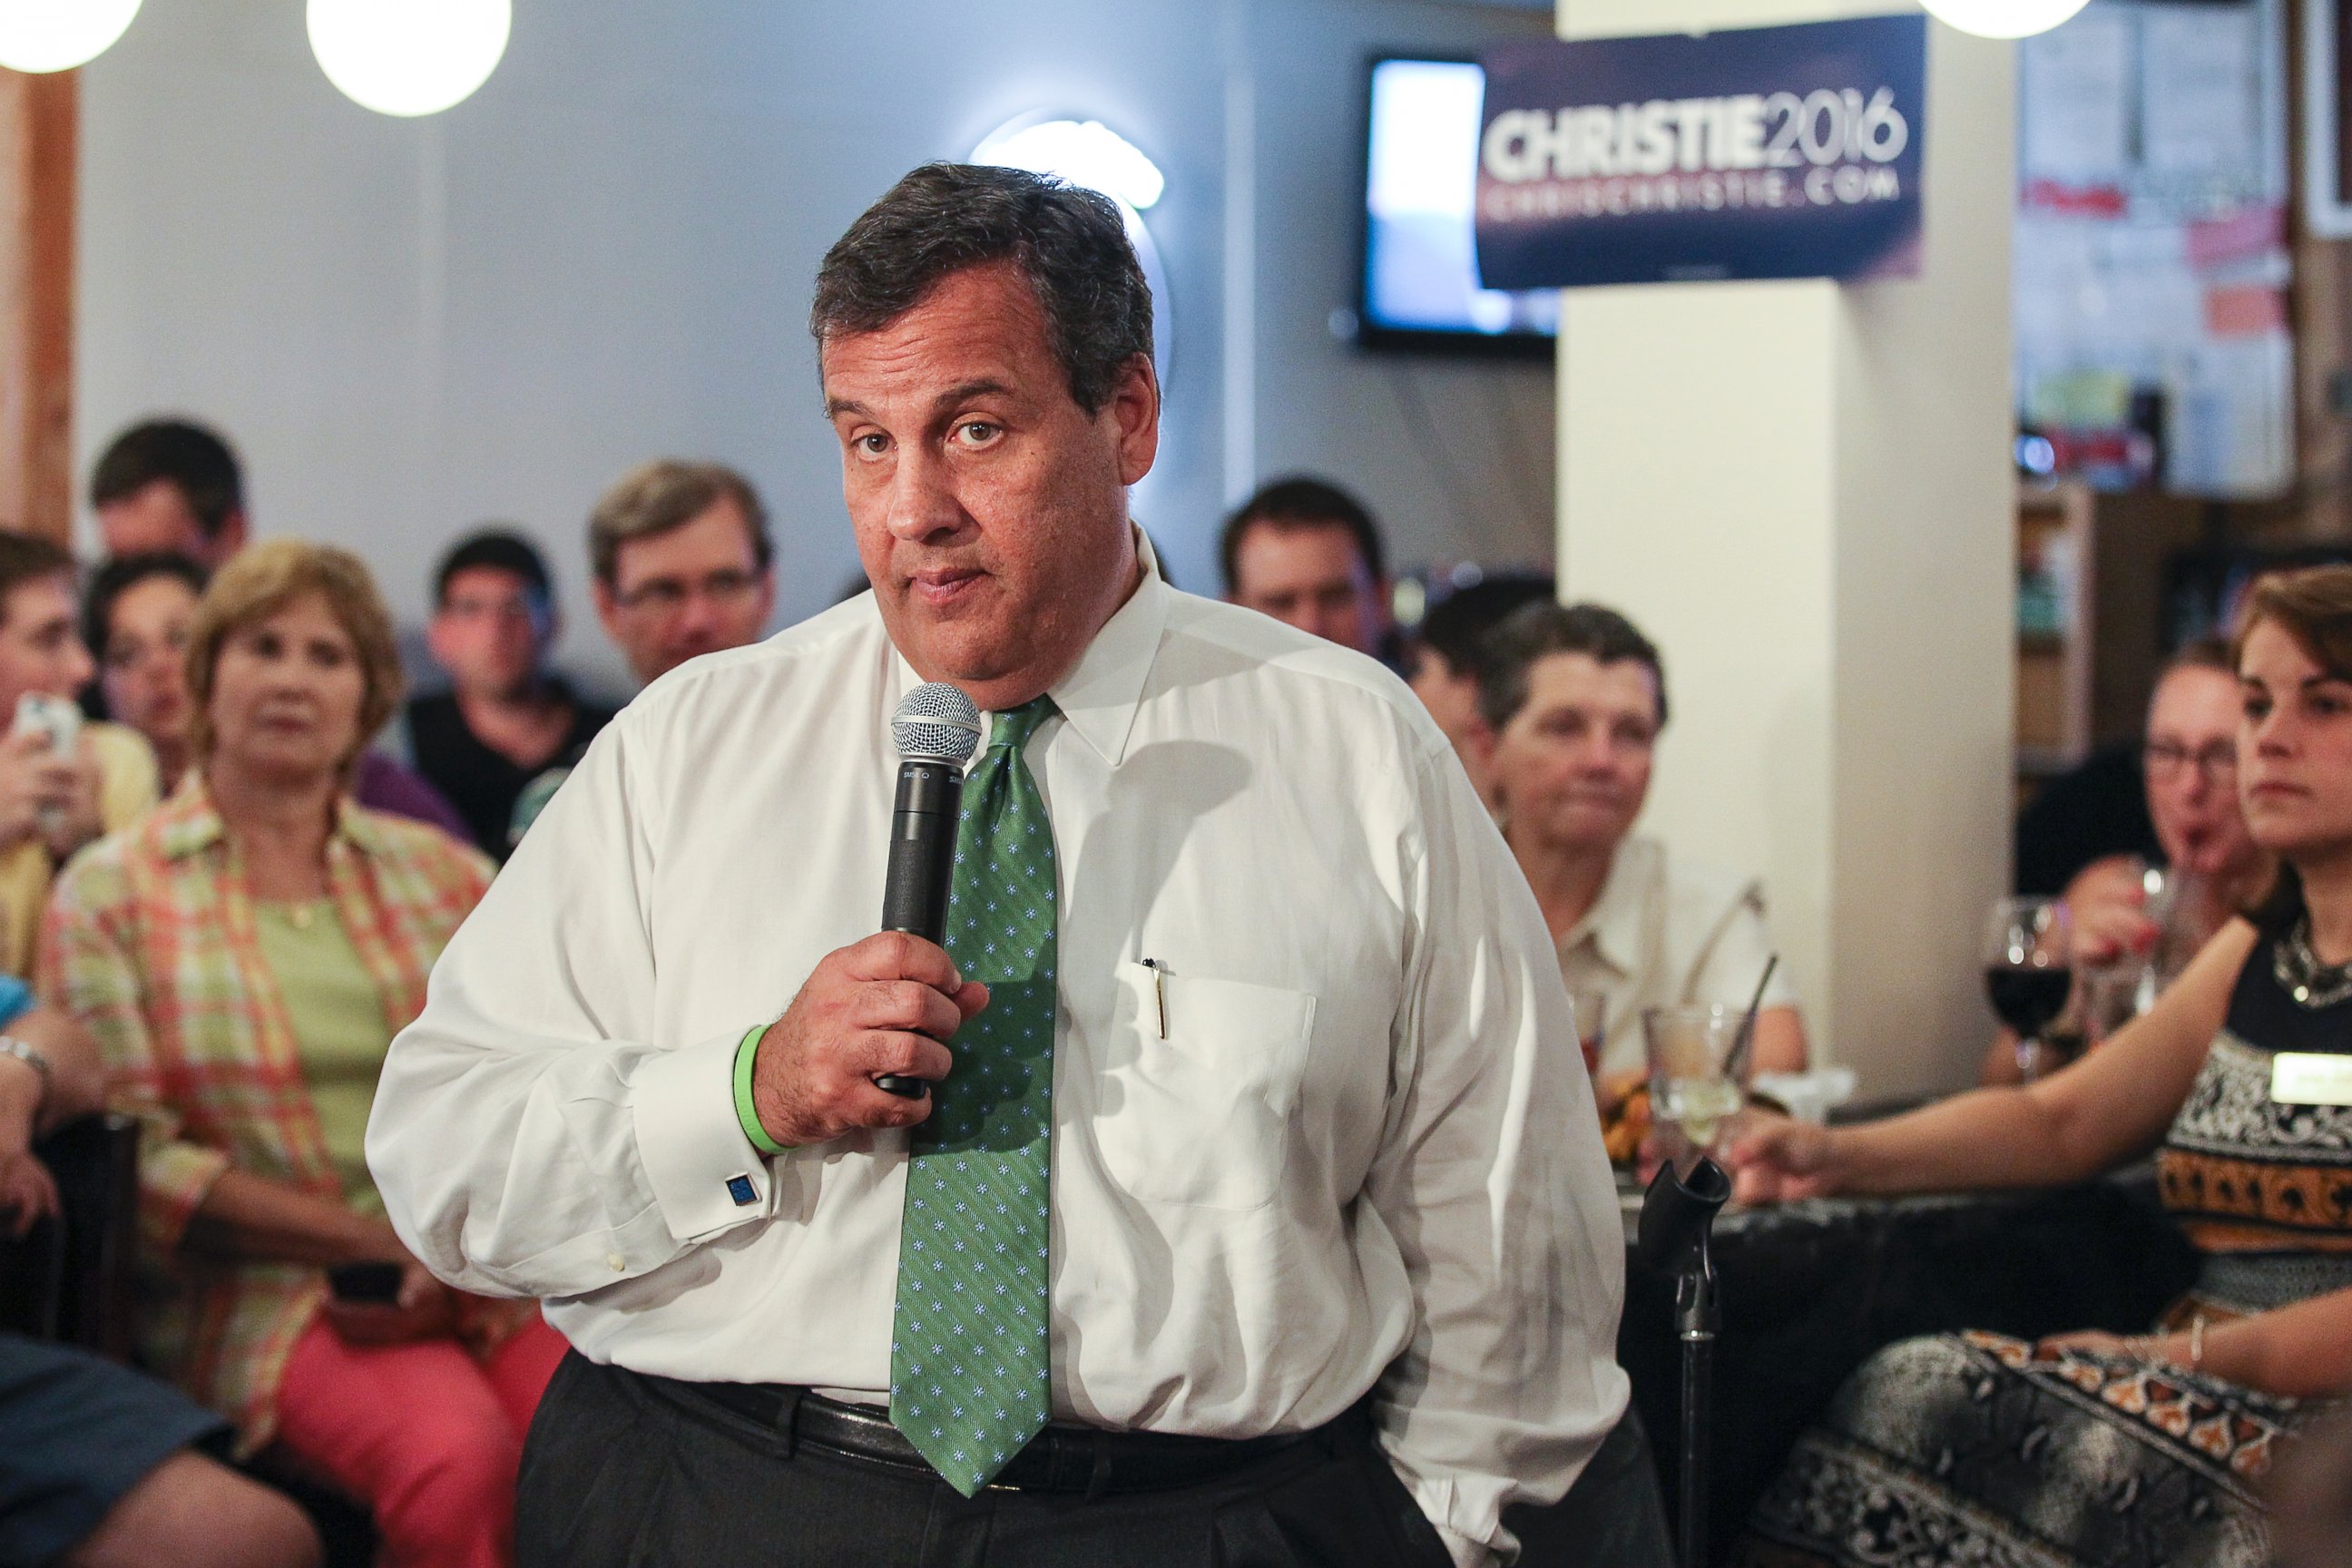 PHOTO: Republican presidential candidate, New Jersey Gov. Chris Christie, speaks at a town hall meeting at Sayde's Neighborhood Bar & Grill in Salem, N.H., on Aug. 24, 2015.